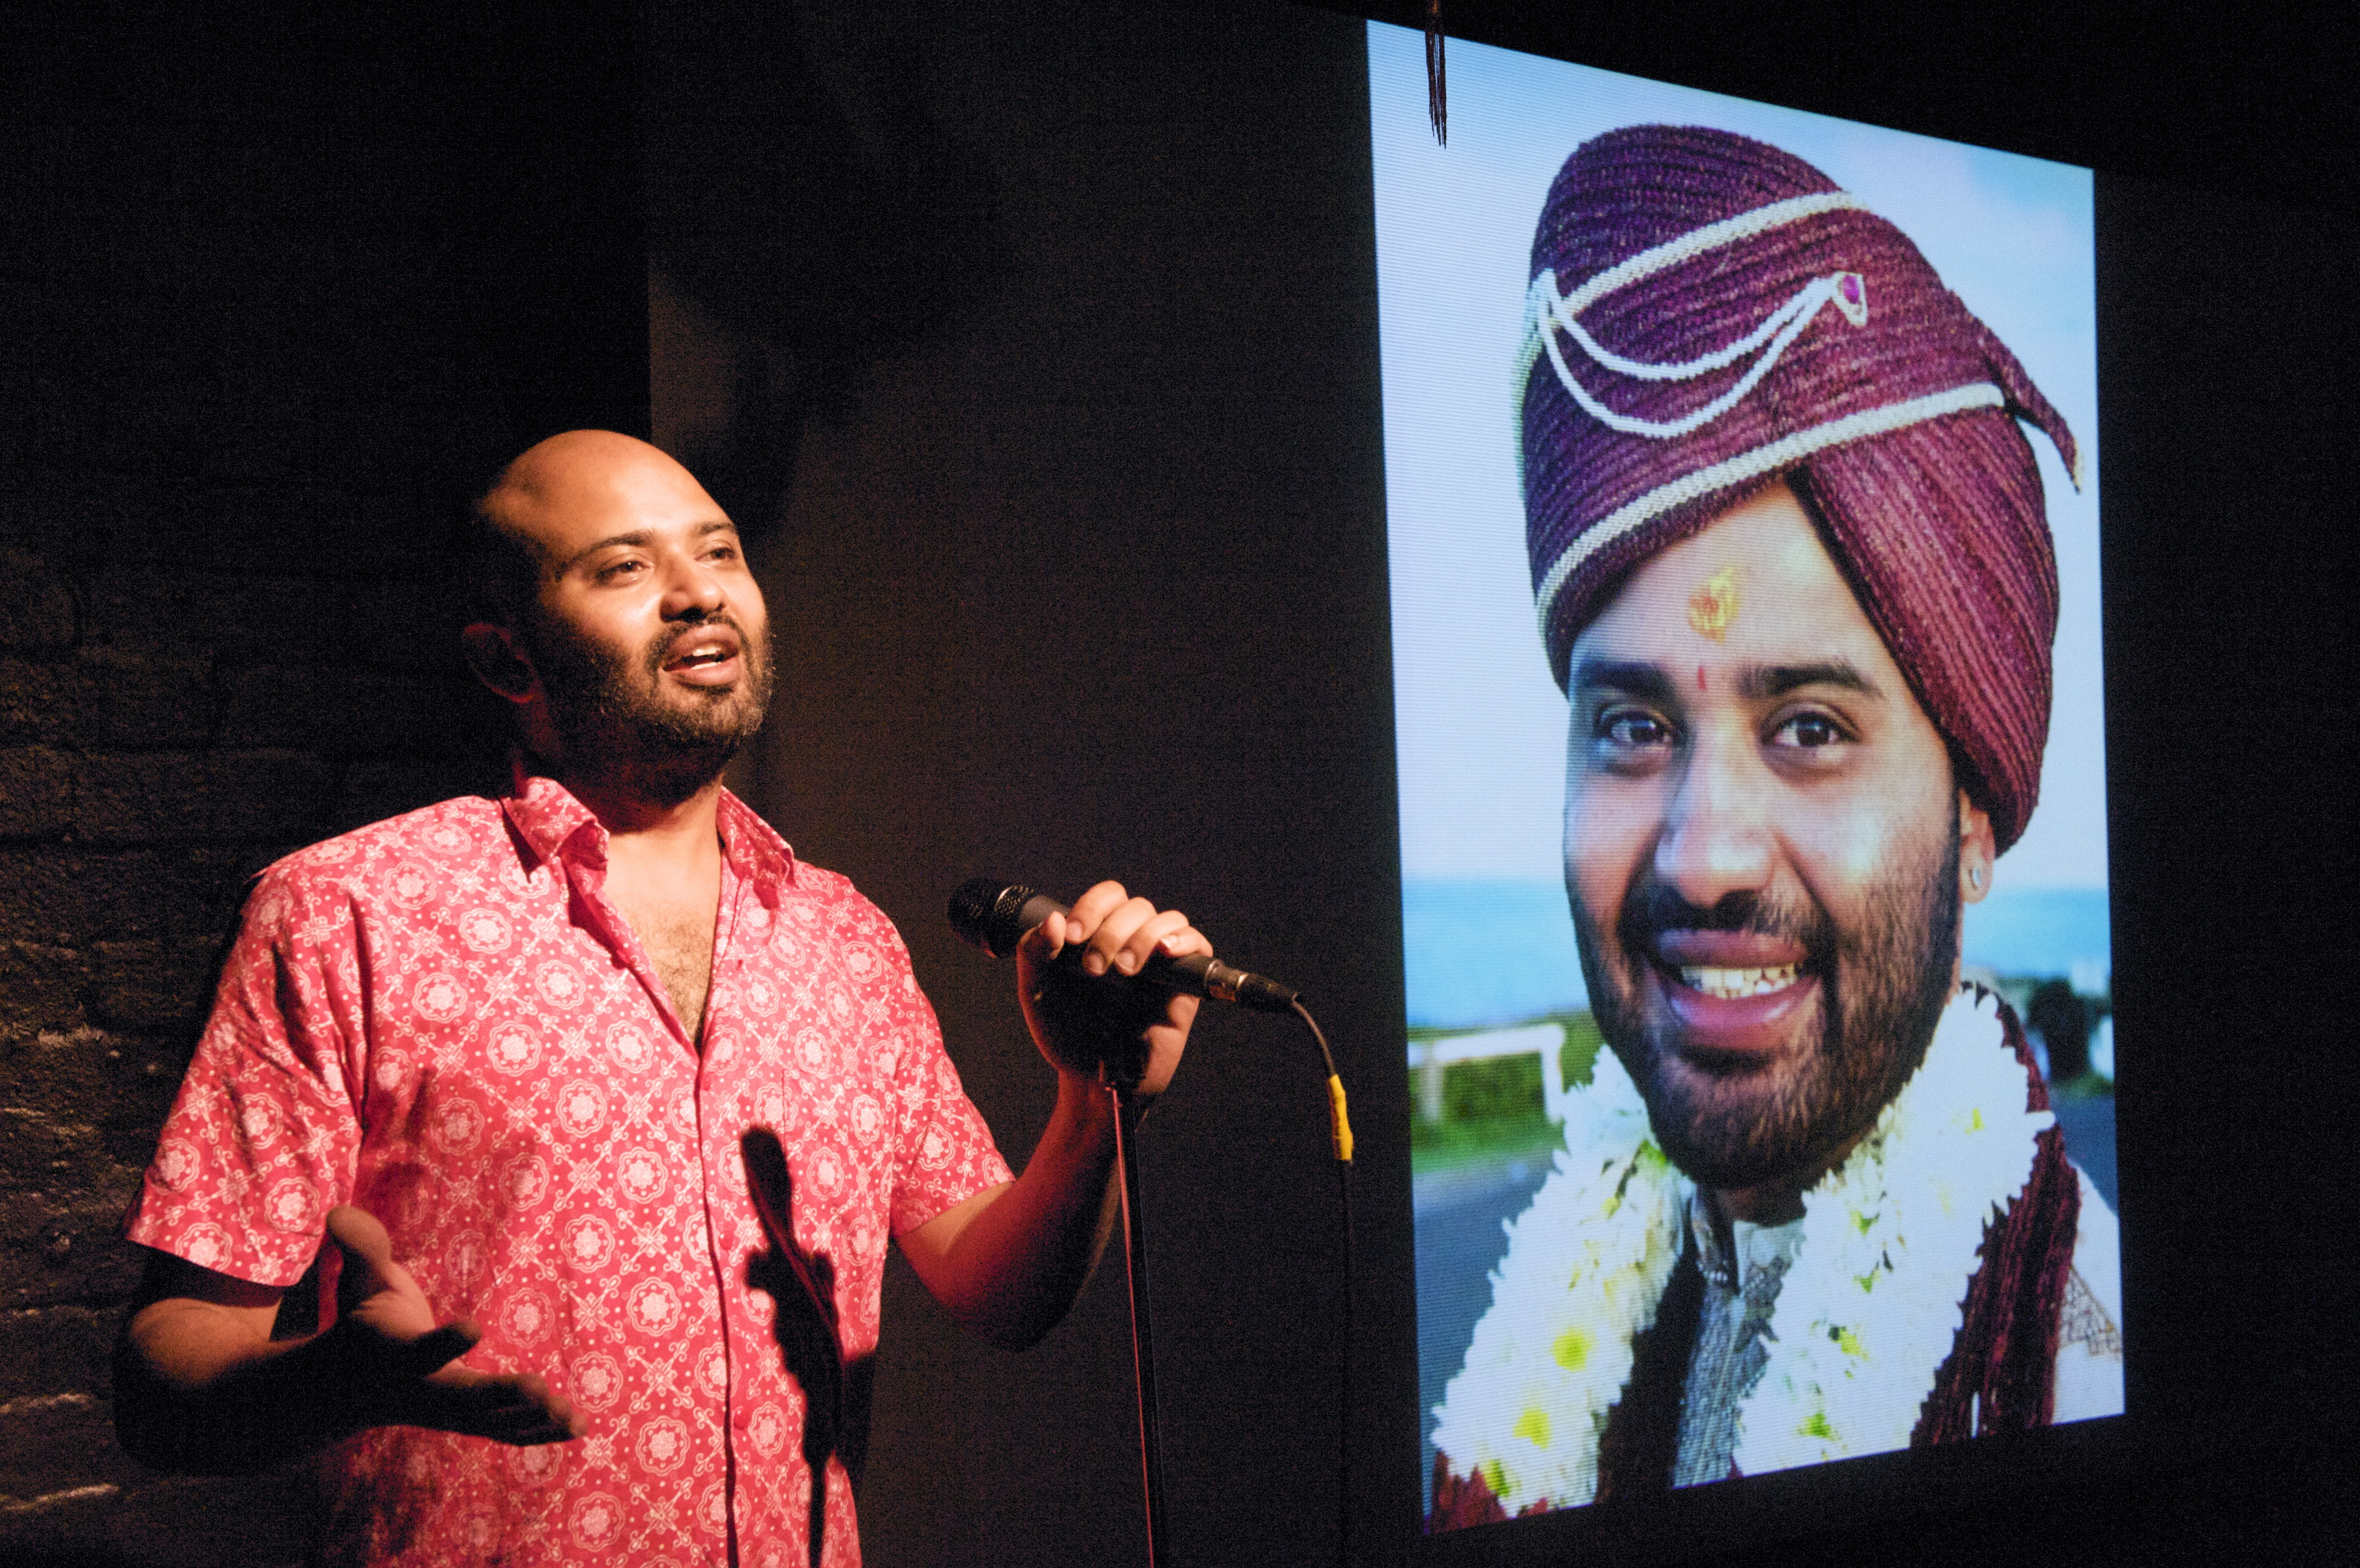 Sunil in red shirt at microphone in front of a picture of himself in a turban